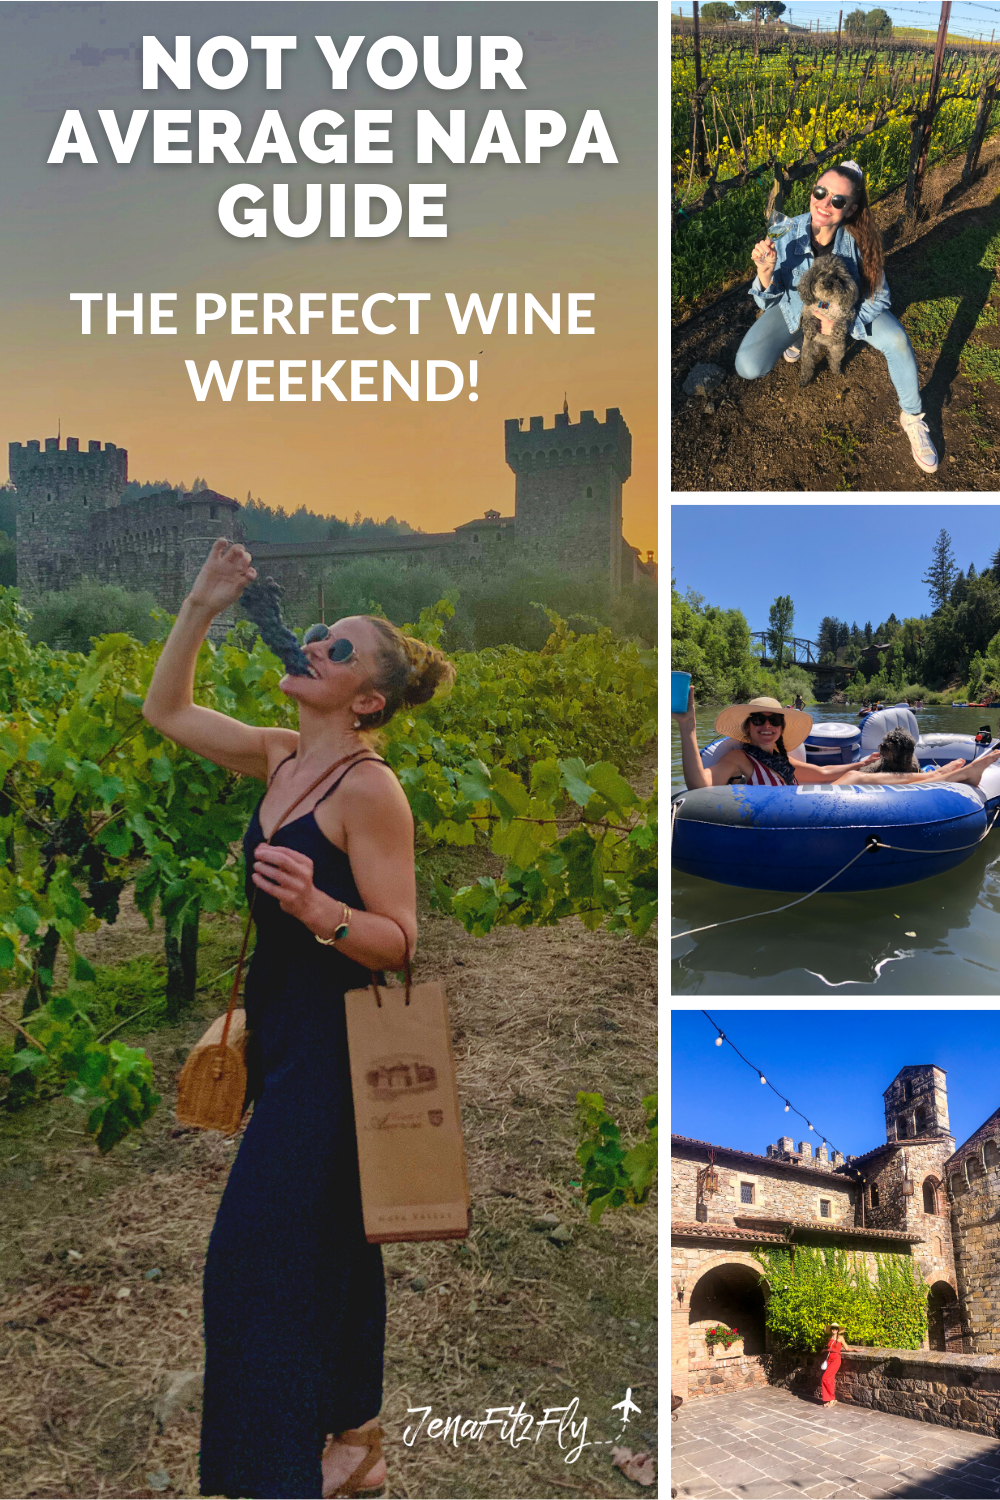 This is not your average Napa guide, but i promise this is the perfect wine weekend! Napa can be done on a budget, you just have to know where to look. I lay out where to go and what to do for a Napa experience like no other without breaking the bank.